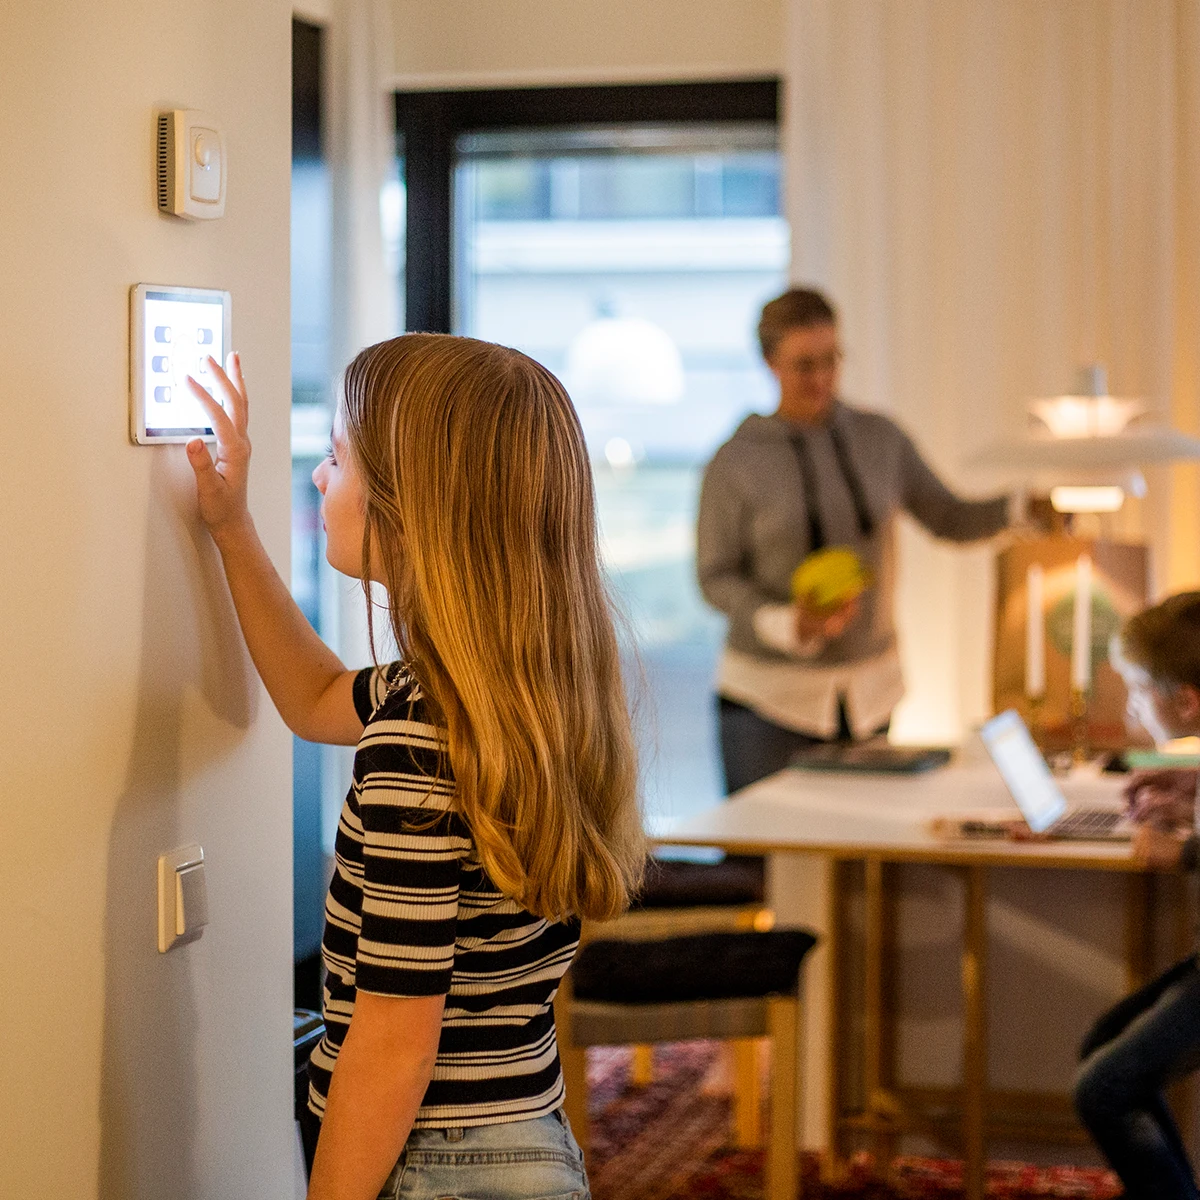 Girl standing in front of a smart thermostat adjusting the settings. Her mother and brother are behind her working at the kitchen table.